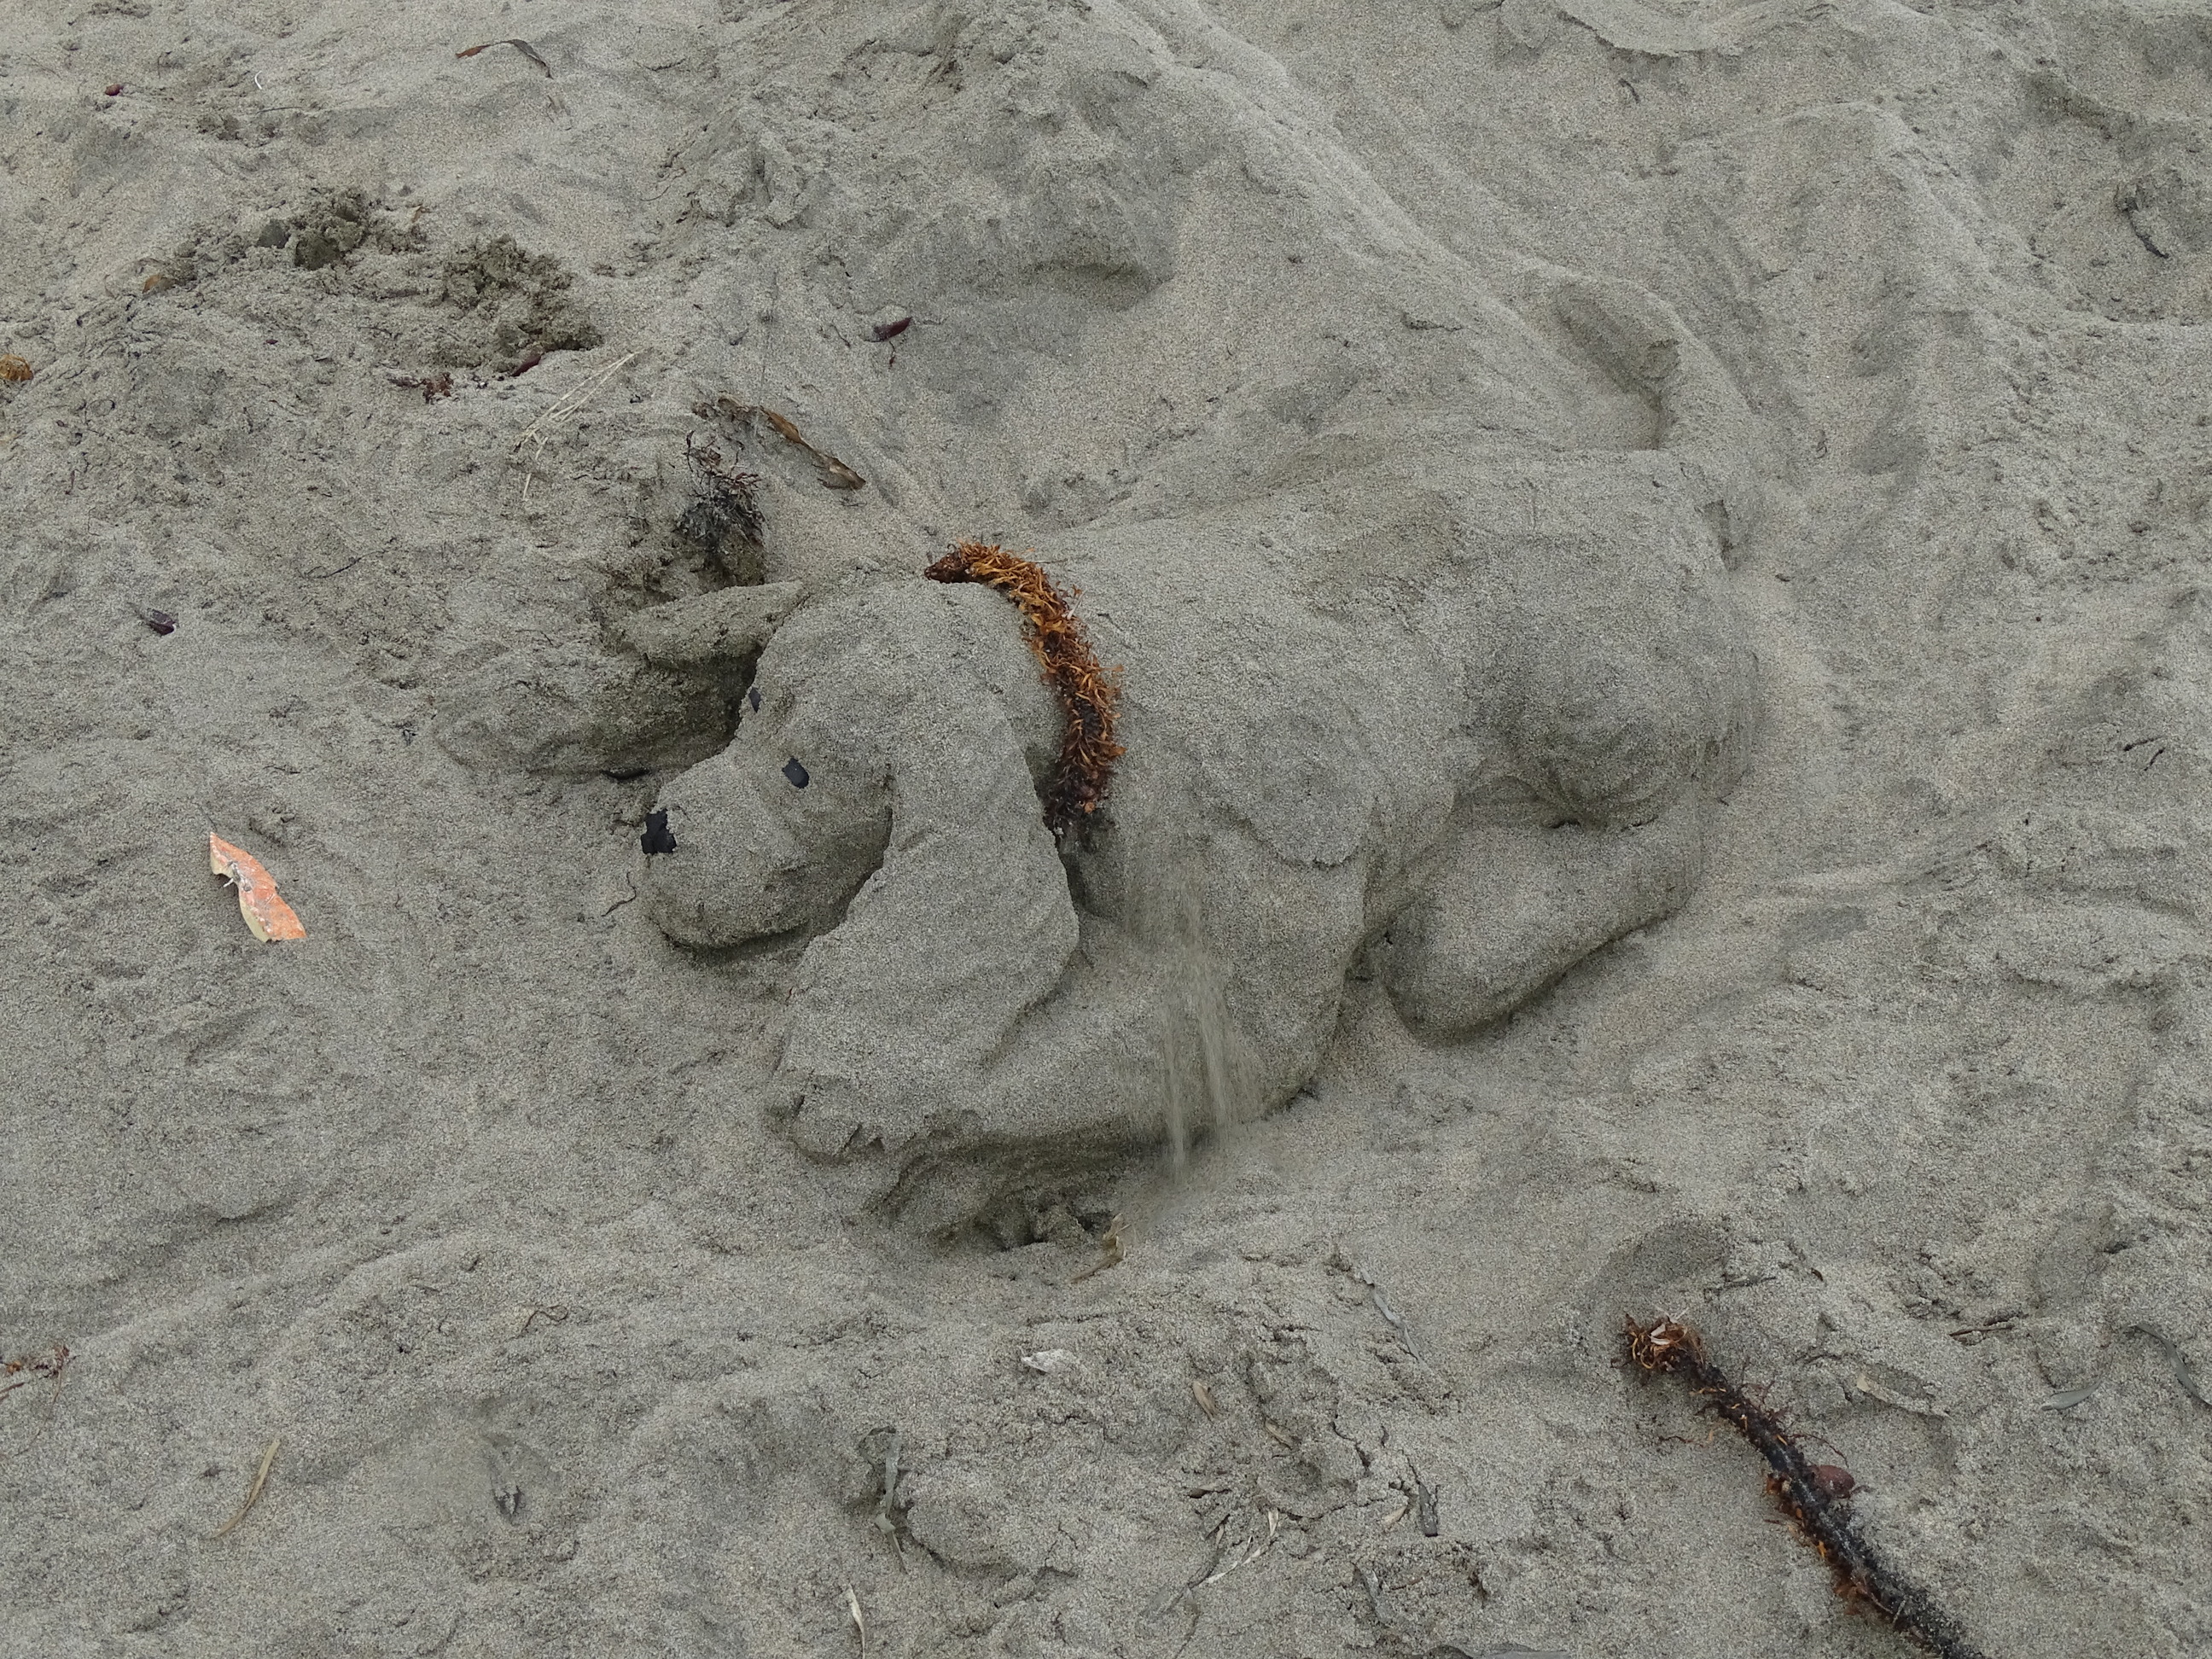 A small sand sculpture of a dog with long, floppy ears.